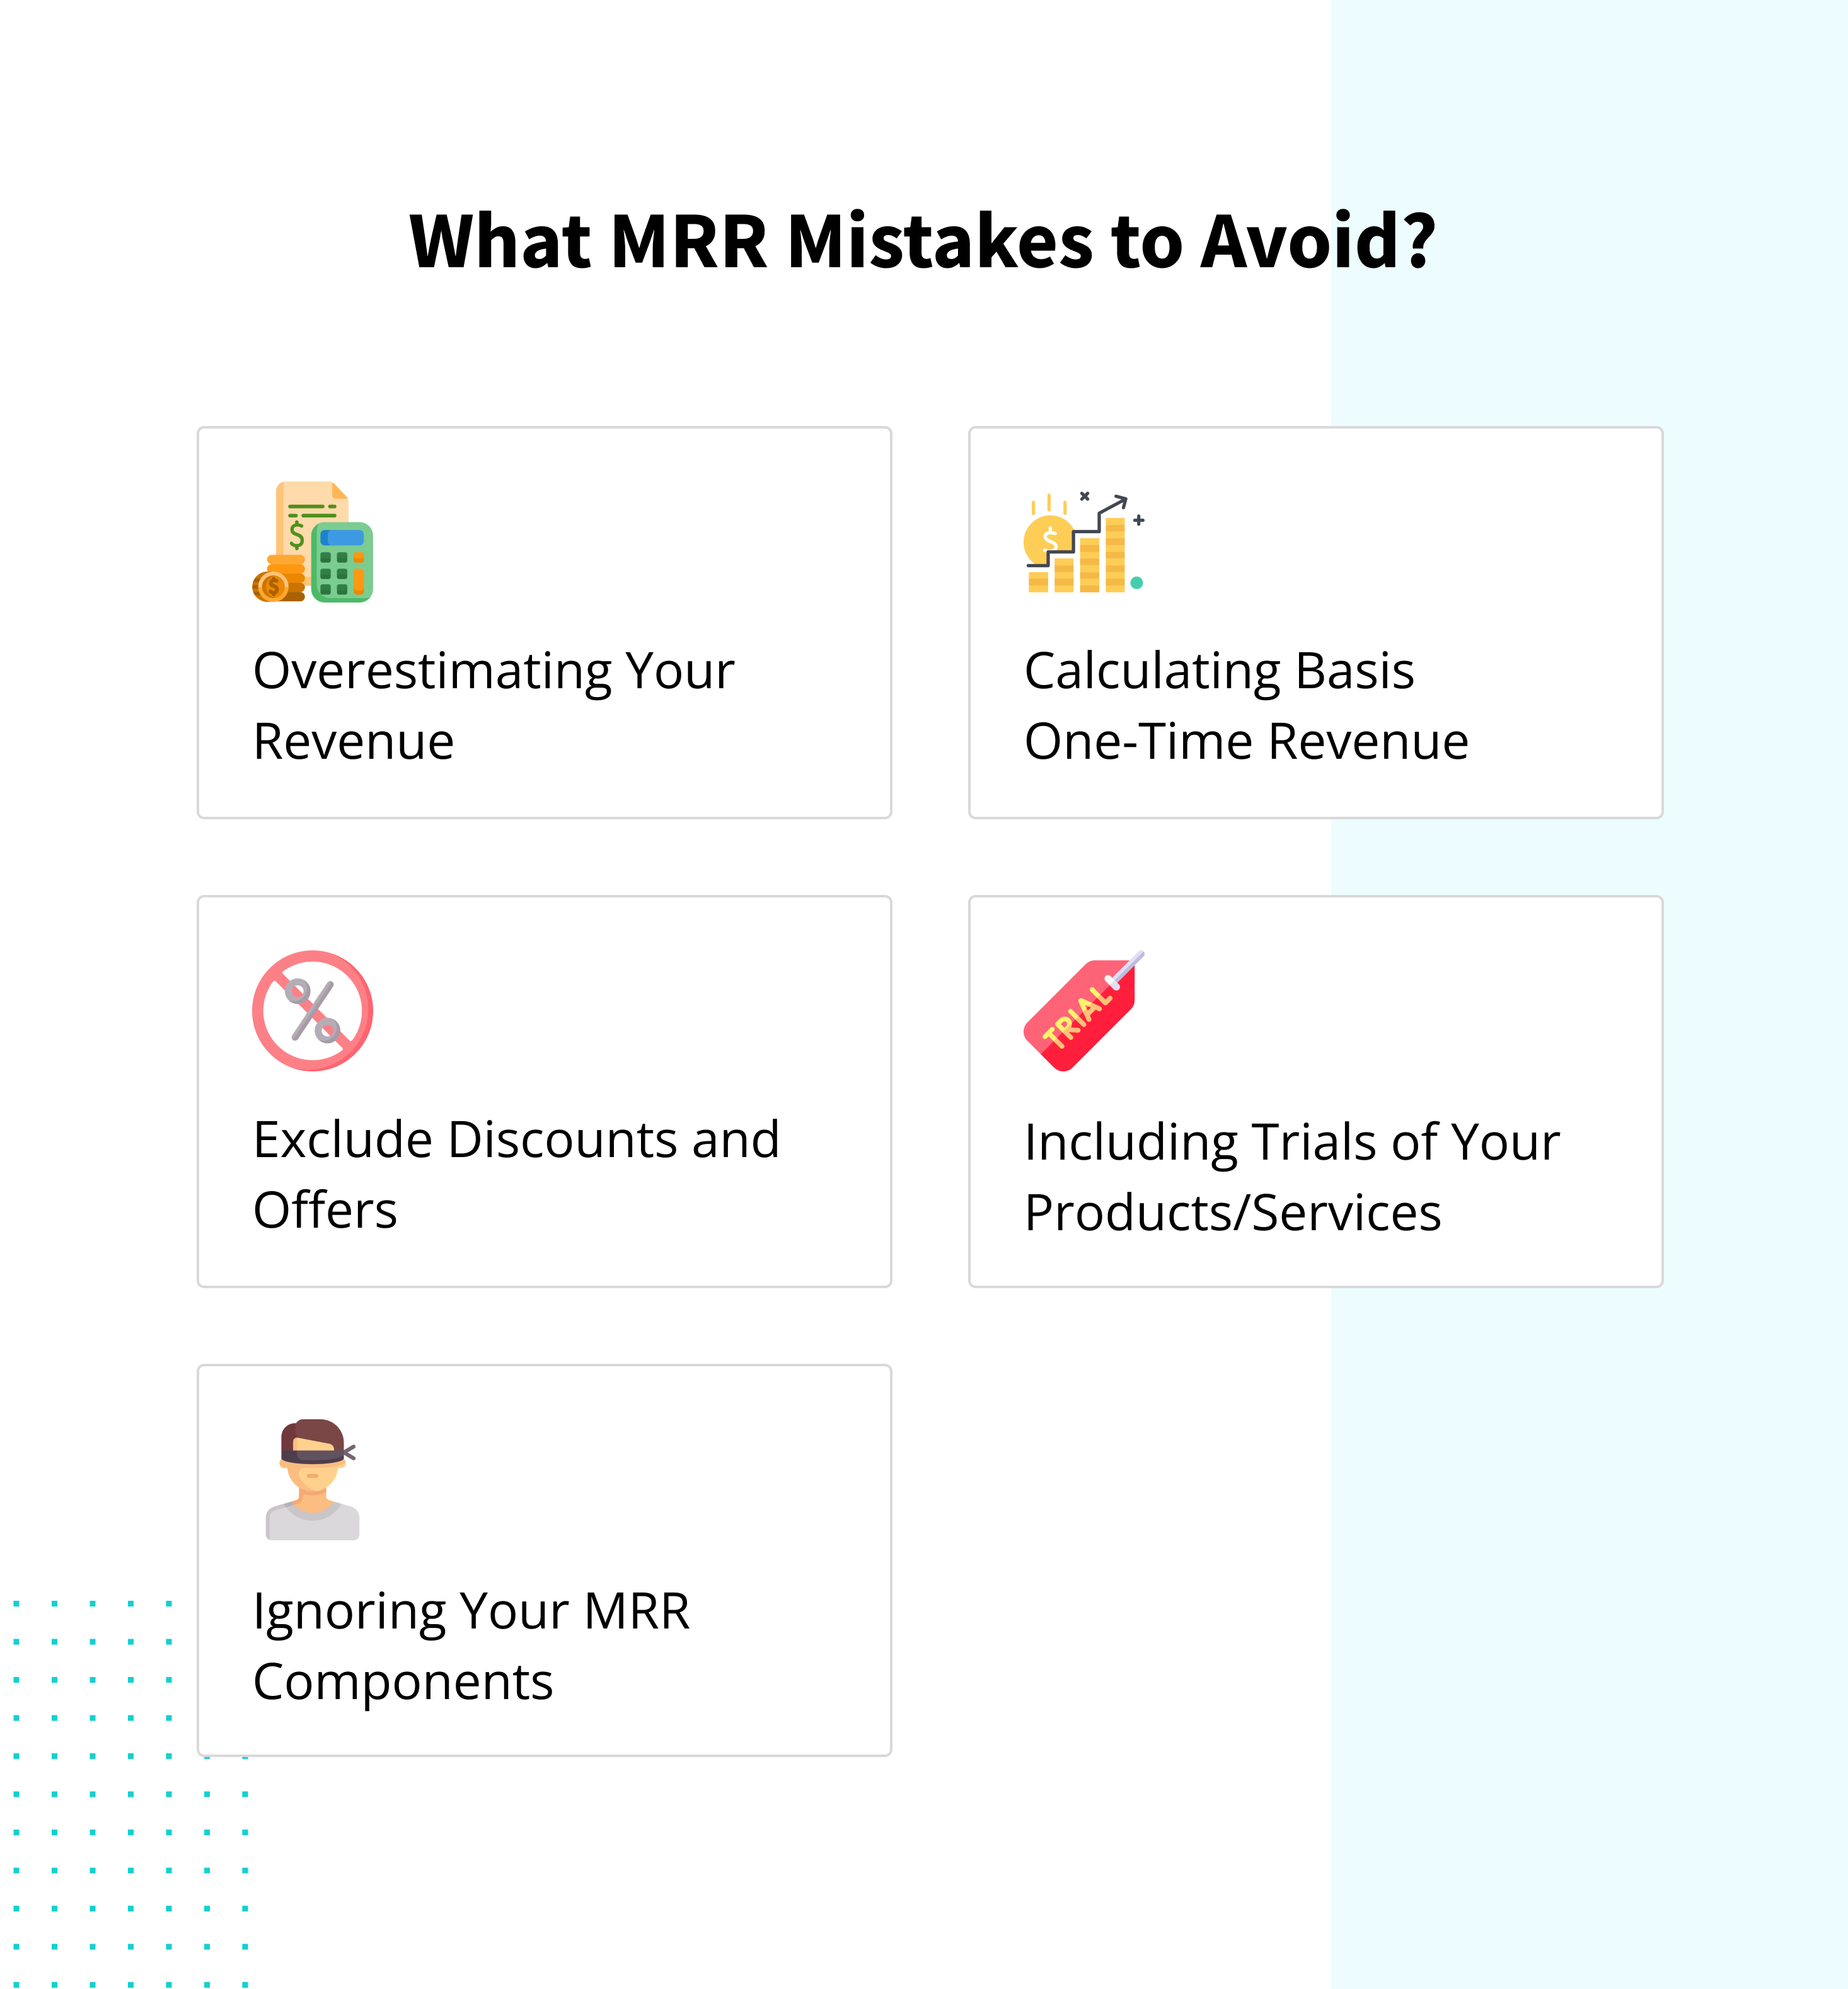 What MRR Mistakes to Avoid?